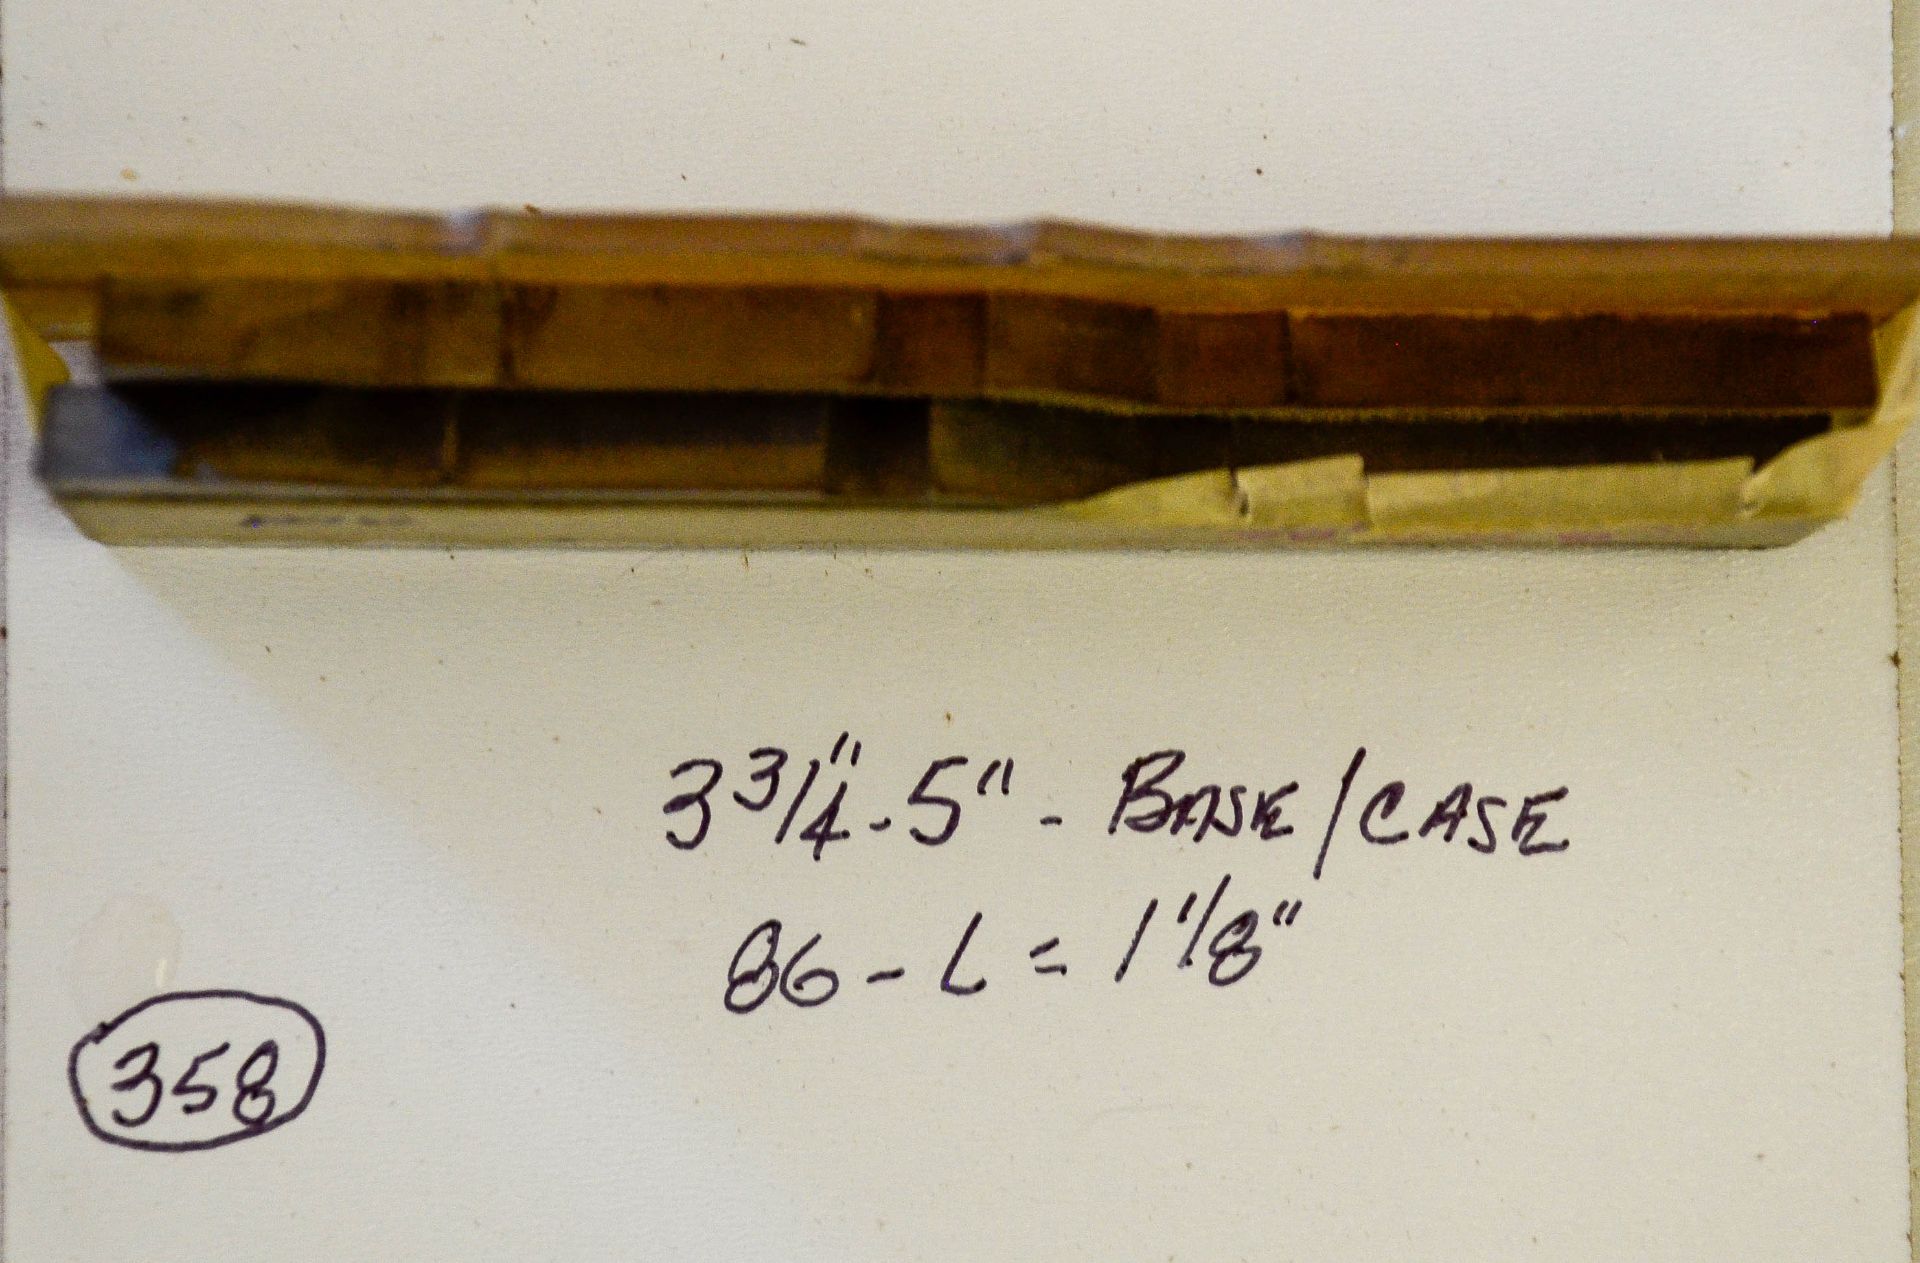 Moulding Knives, 3-3/4"- 5" Base/Case, 86 - L = 1-1/8", Dull, Knives are in Good Condition and R - Image 2 of 2